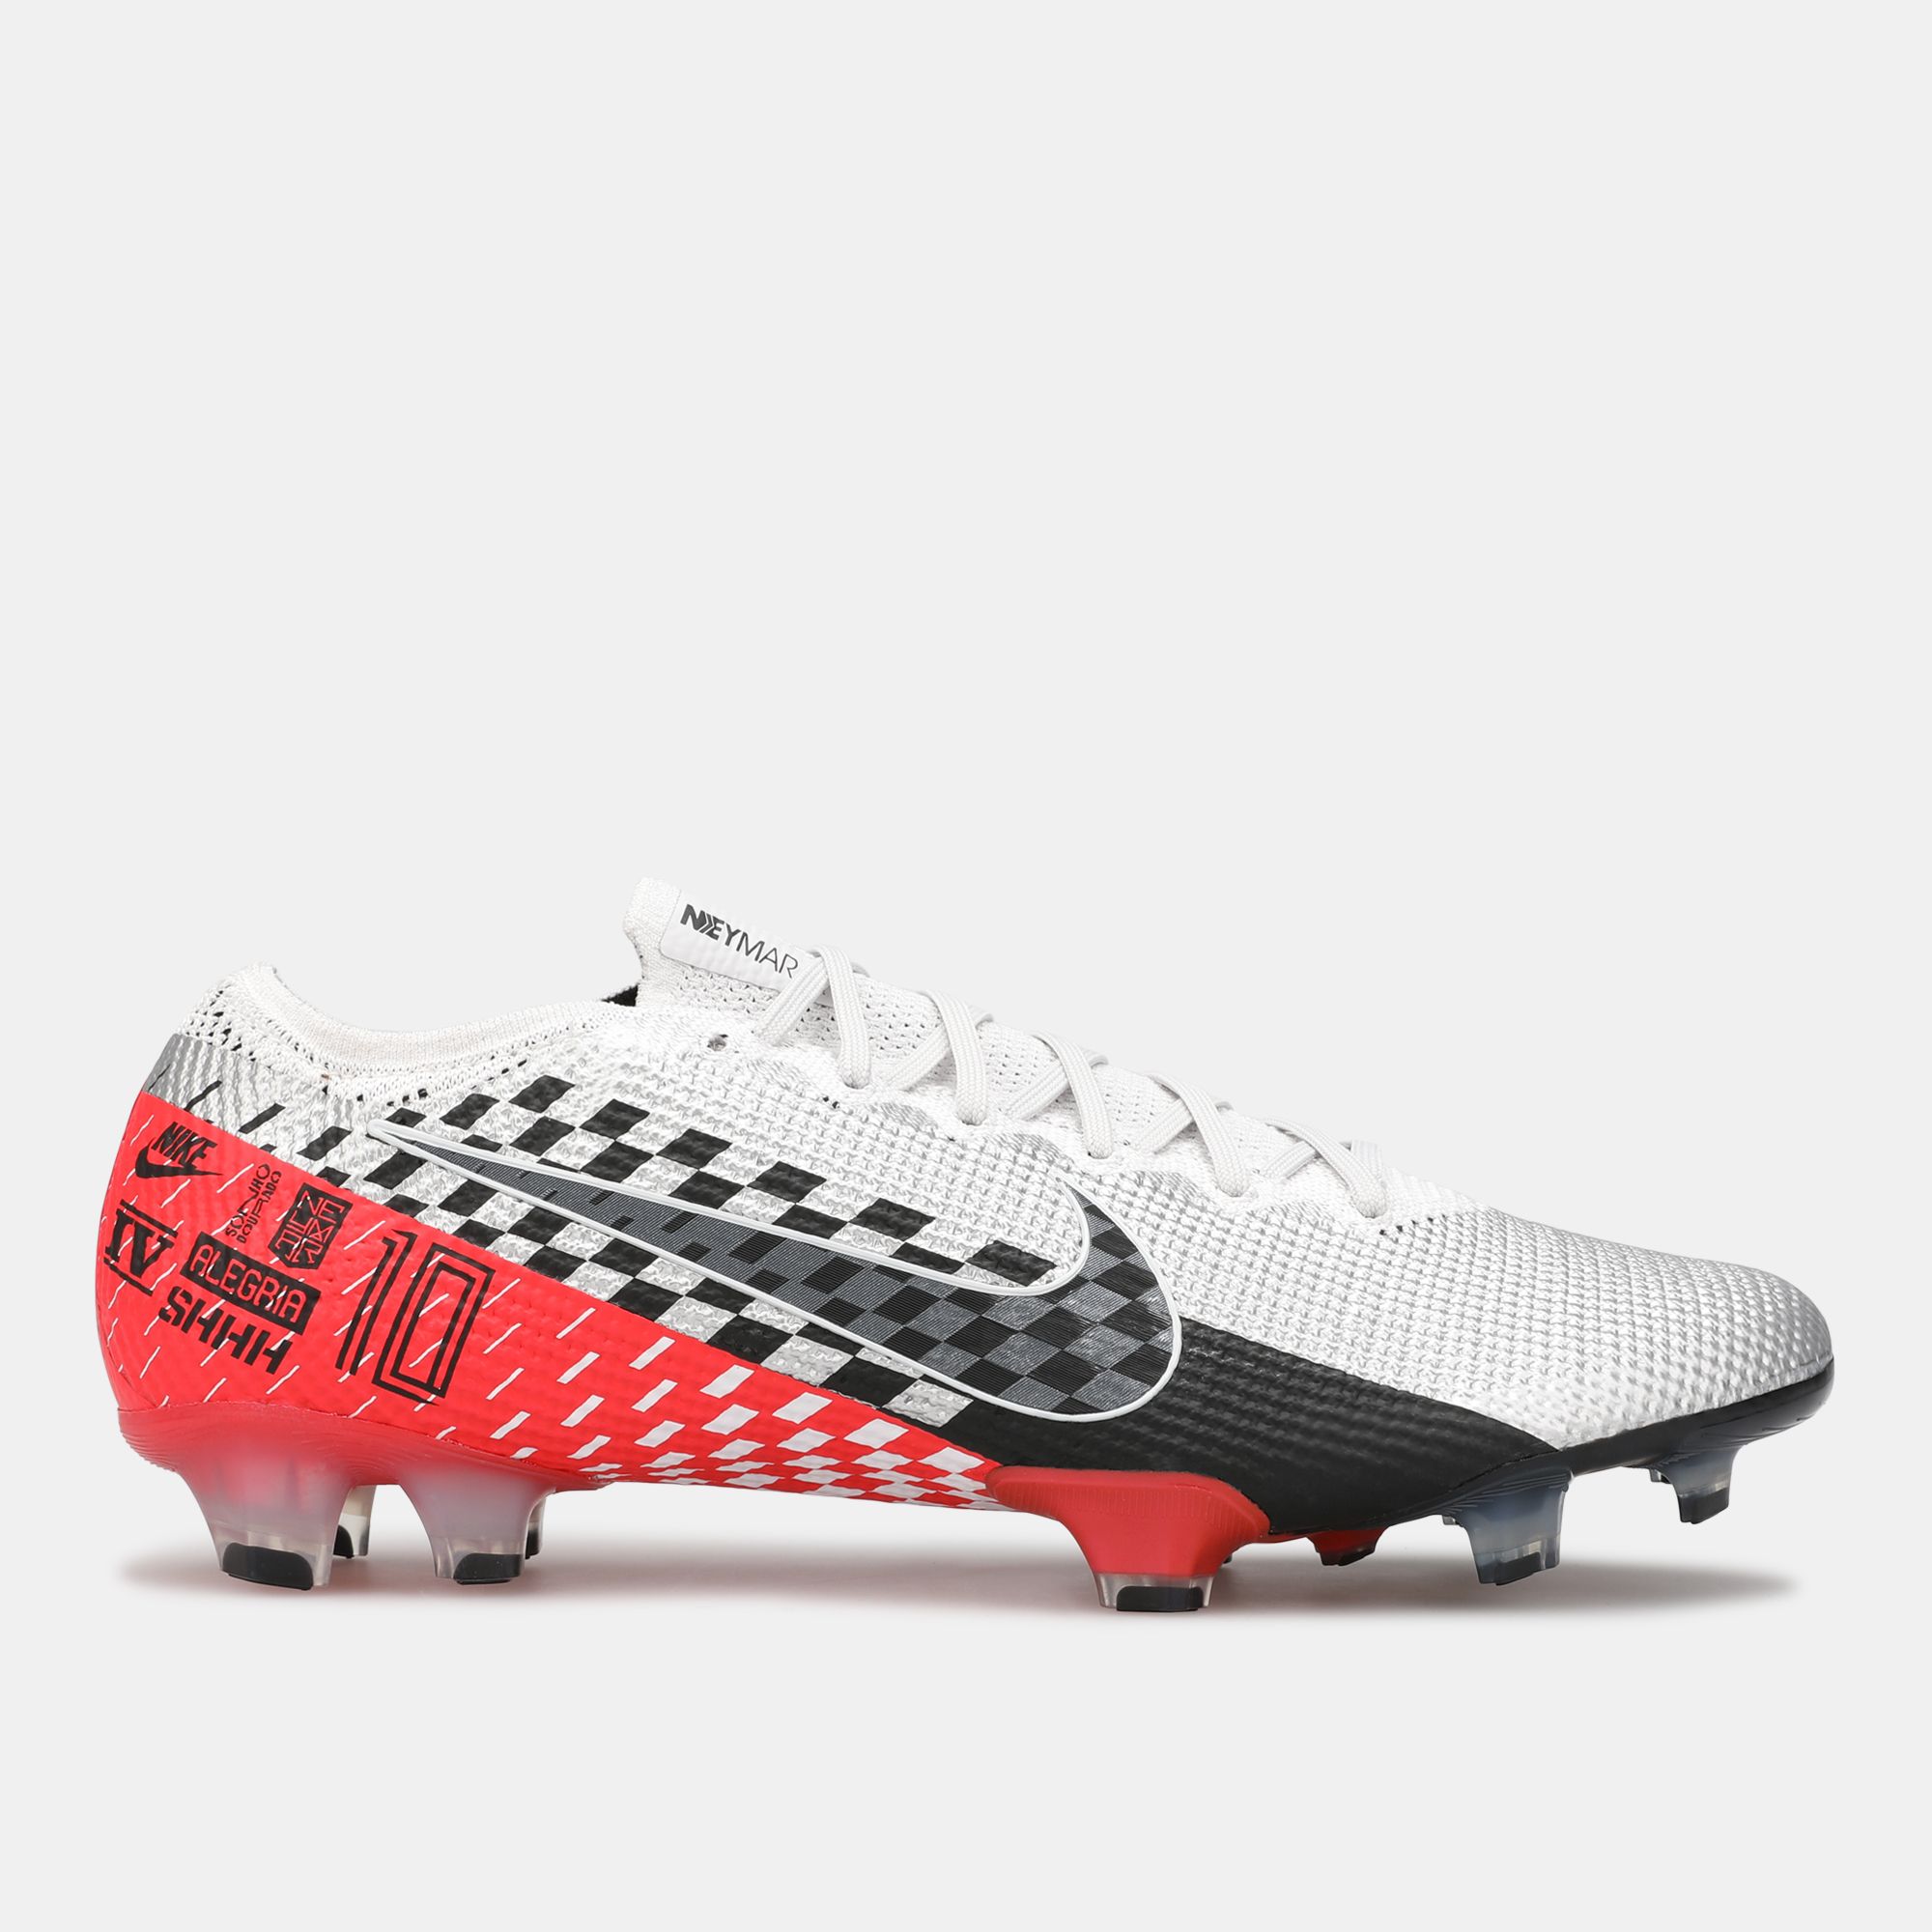 13c soccer cleats